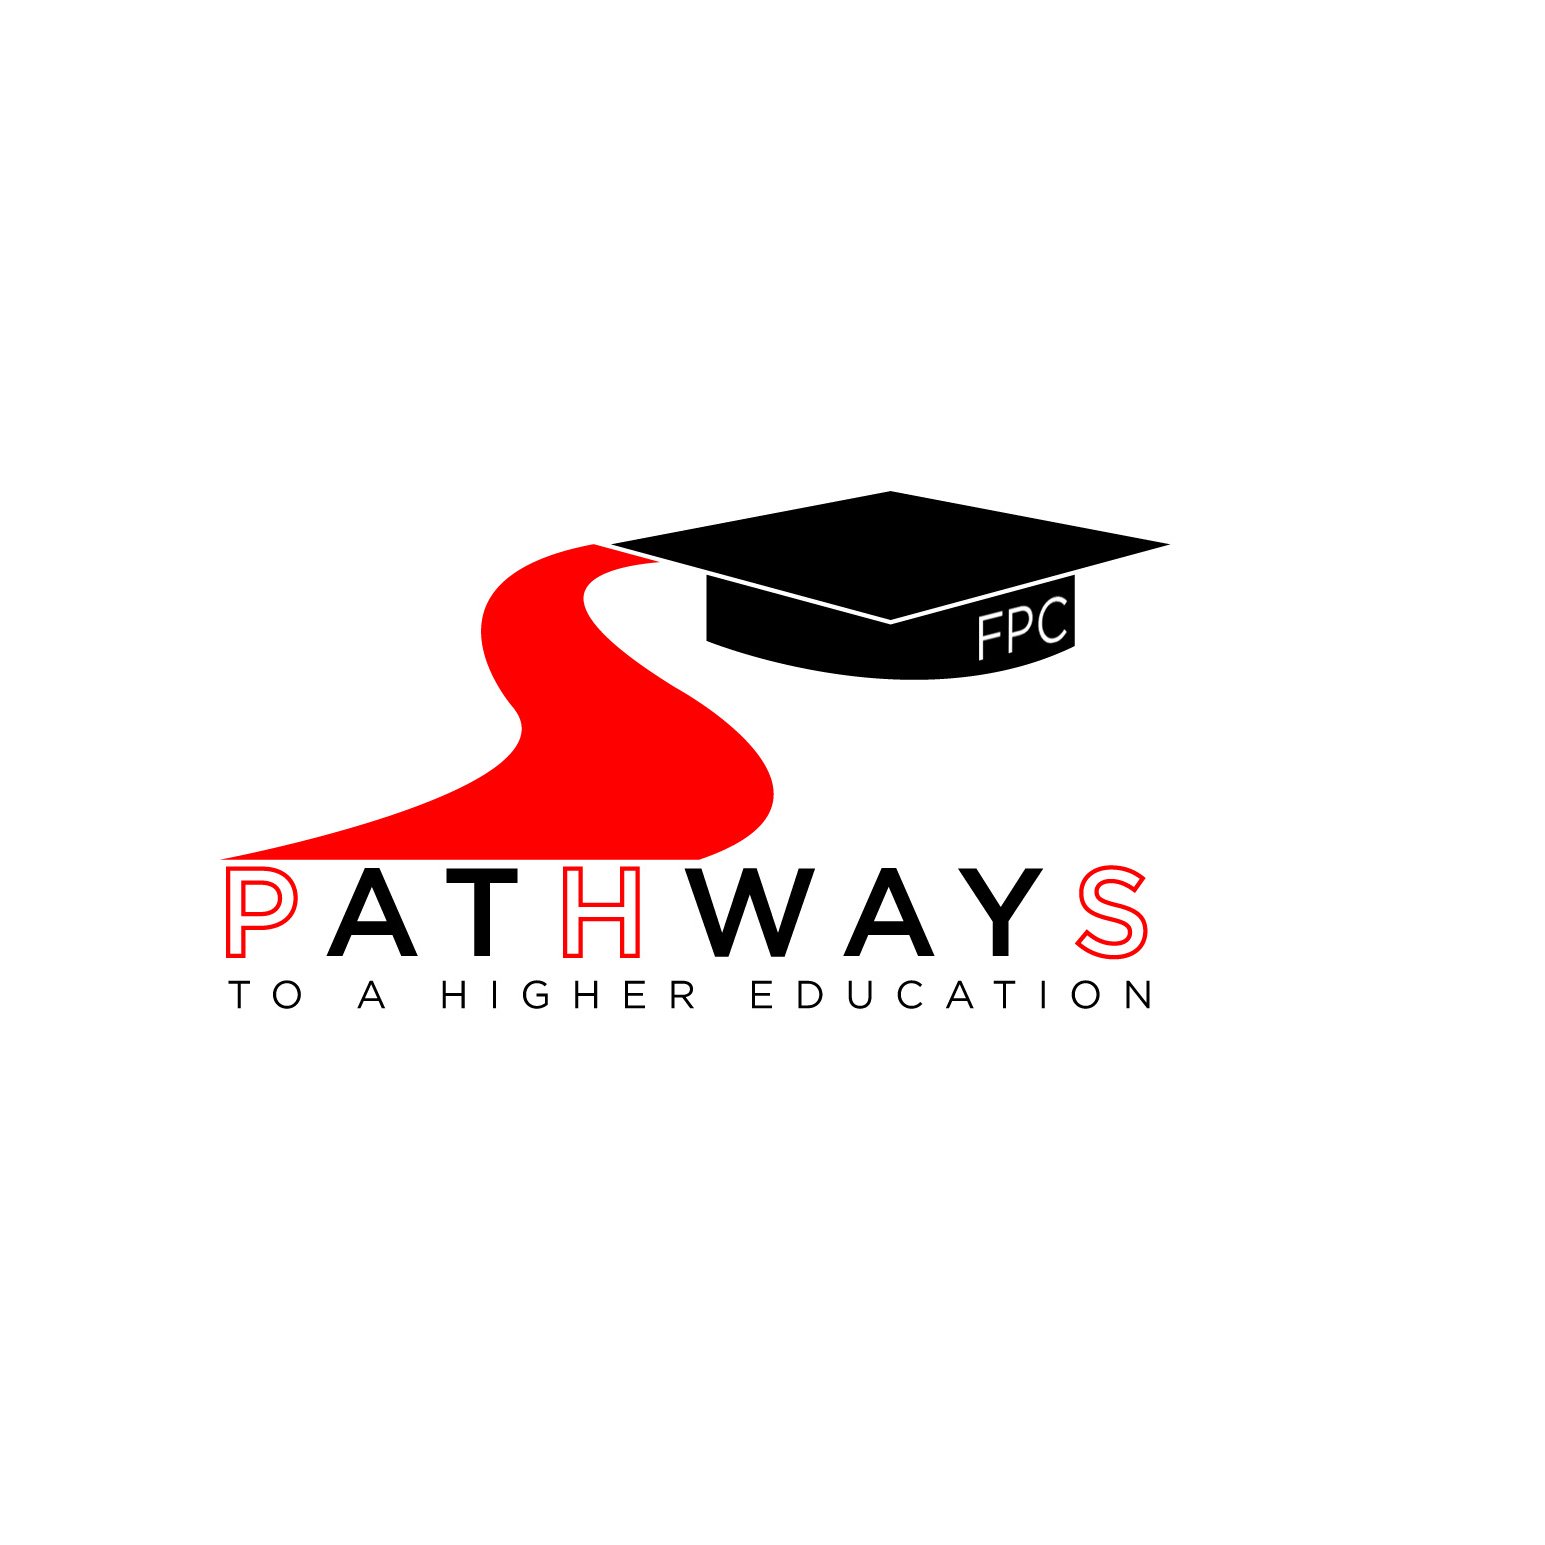 Pathways is a scholarship program for PHS students that guarantees payment of tuition, fees, and books at Frank Phillips College.